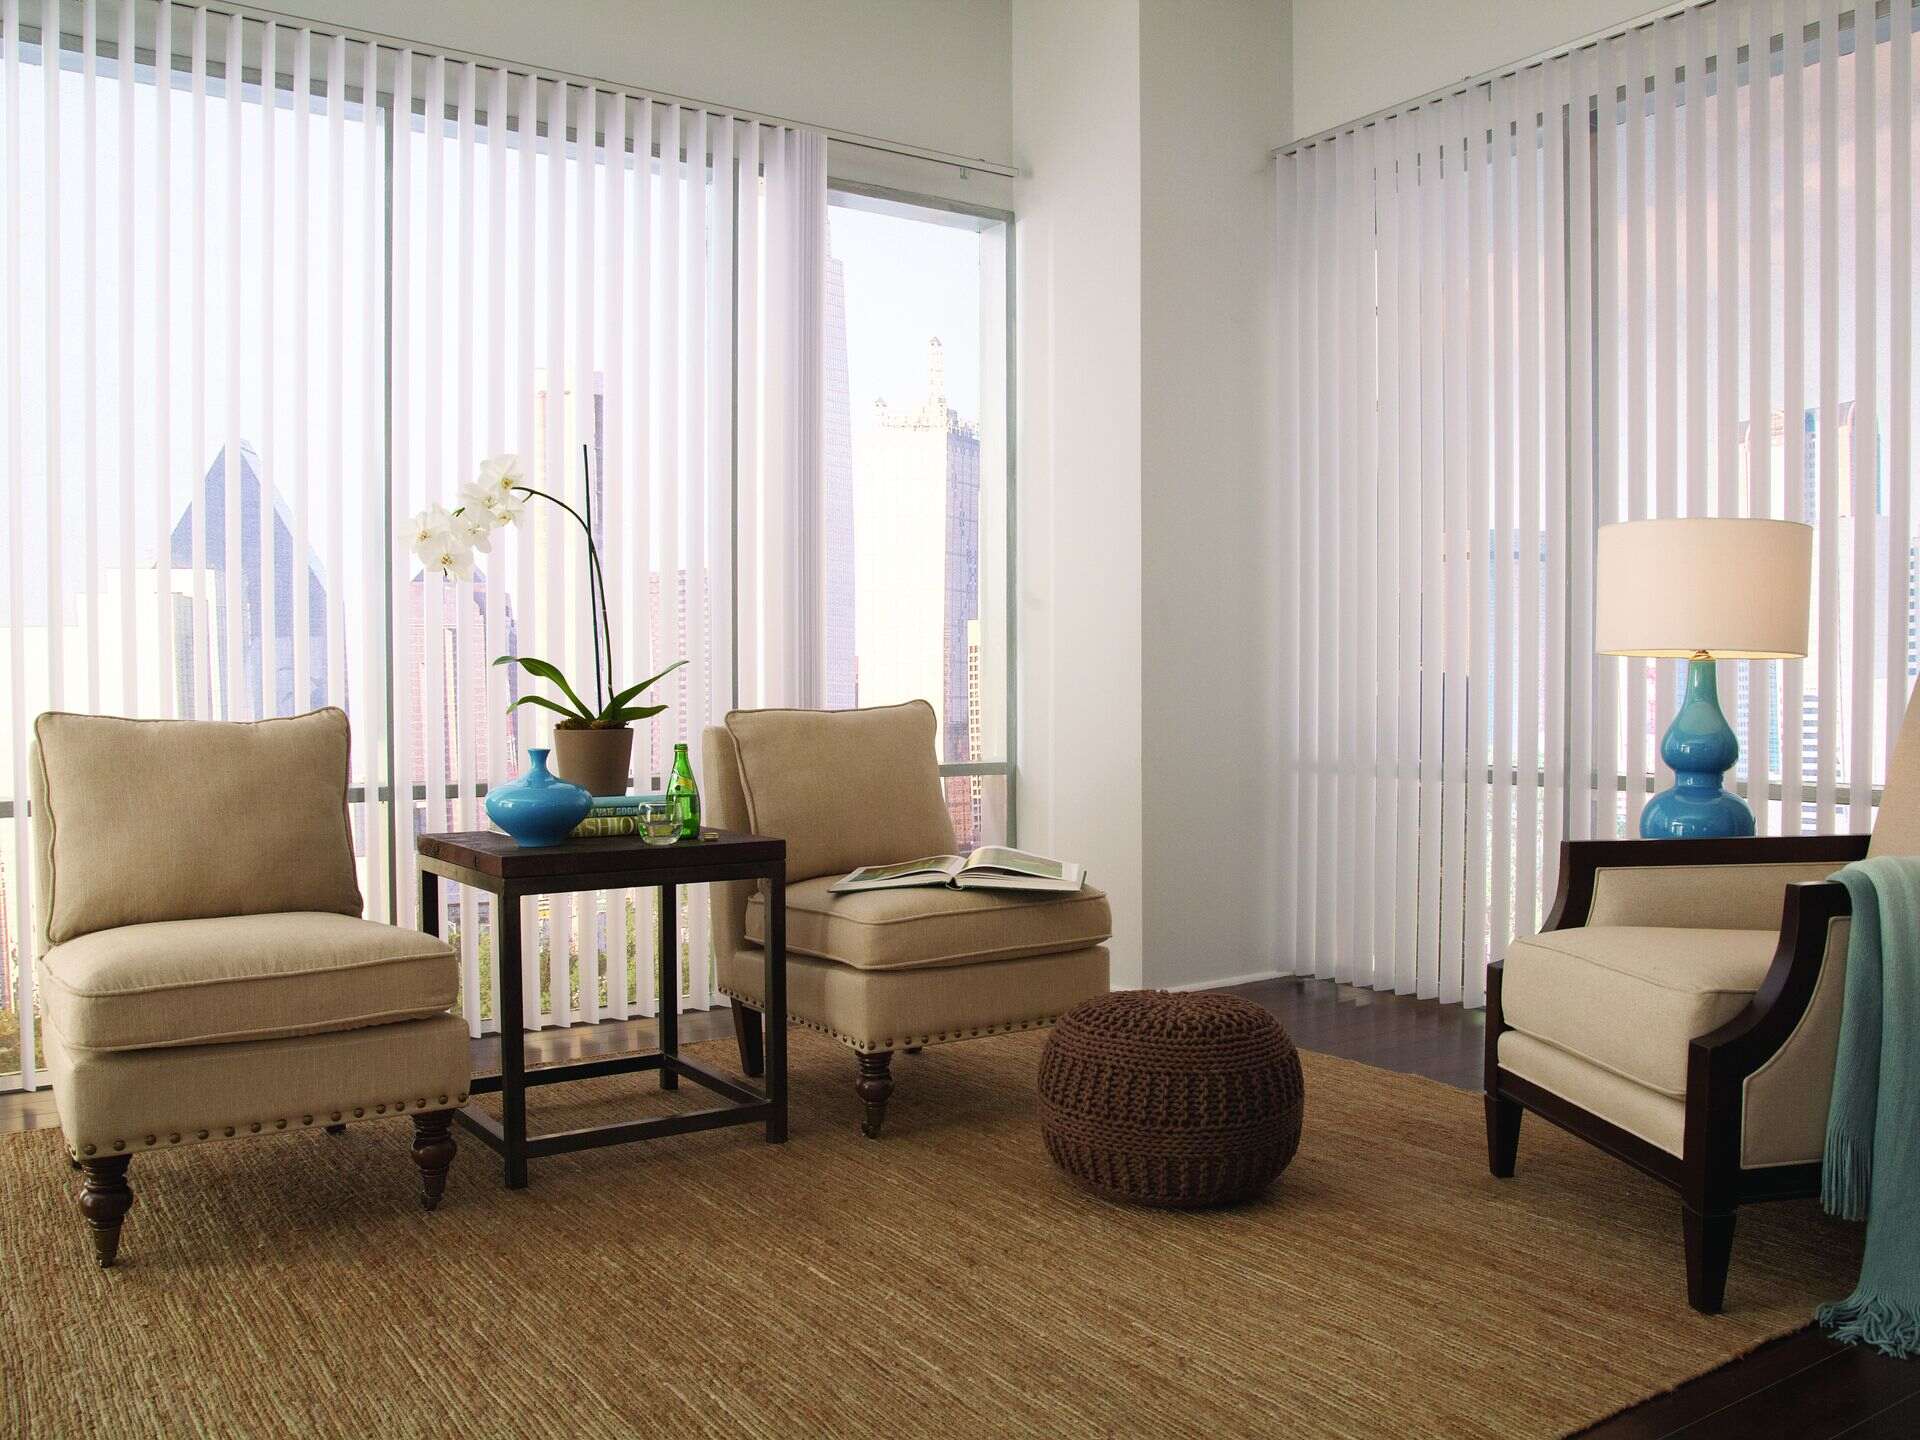 How To Make Vertical Blinds Look Better